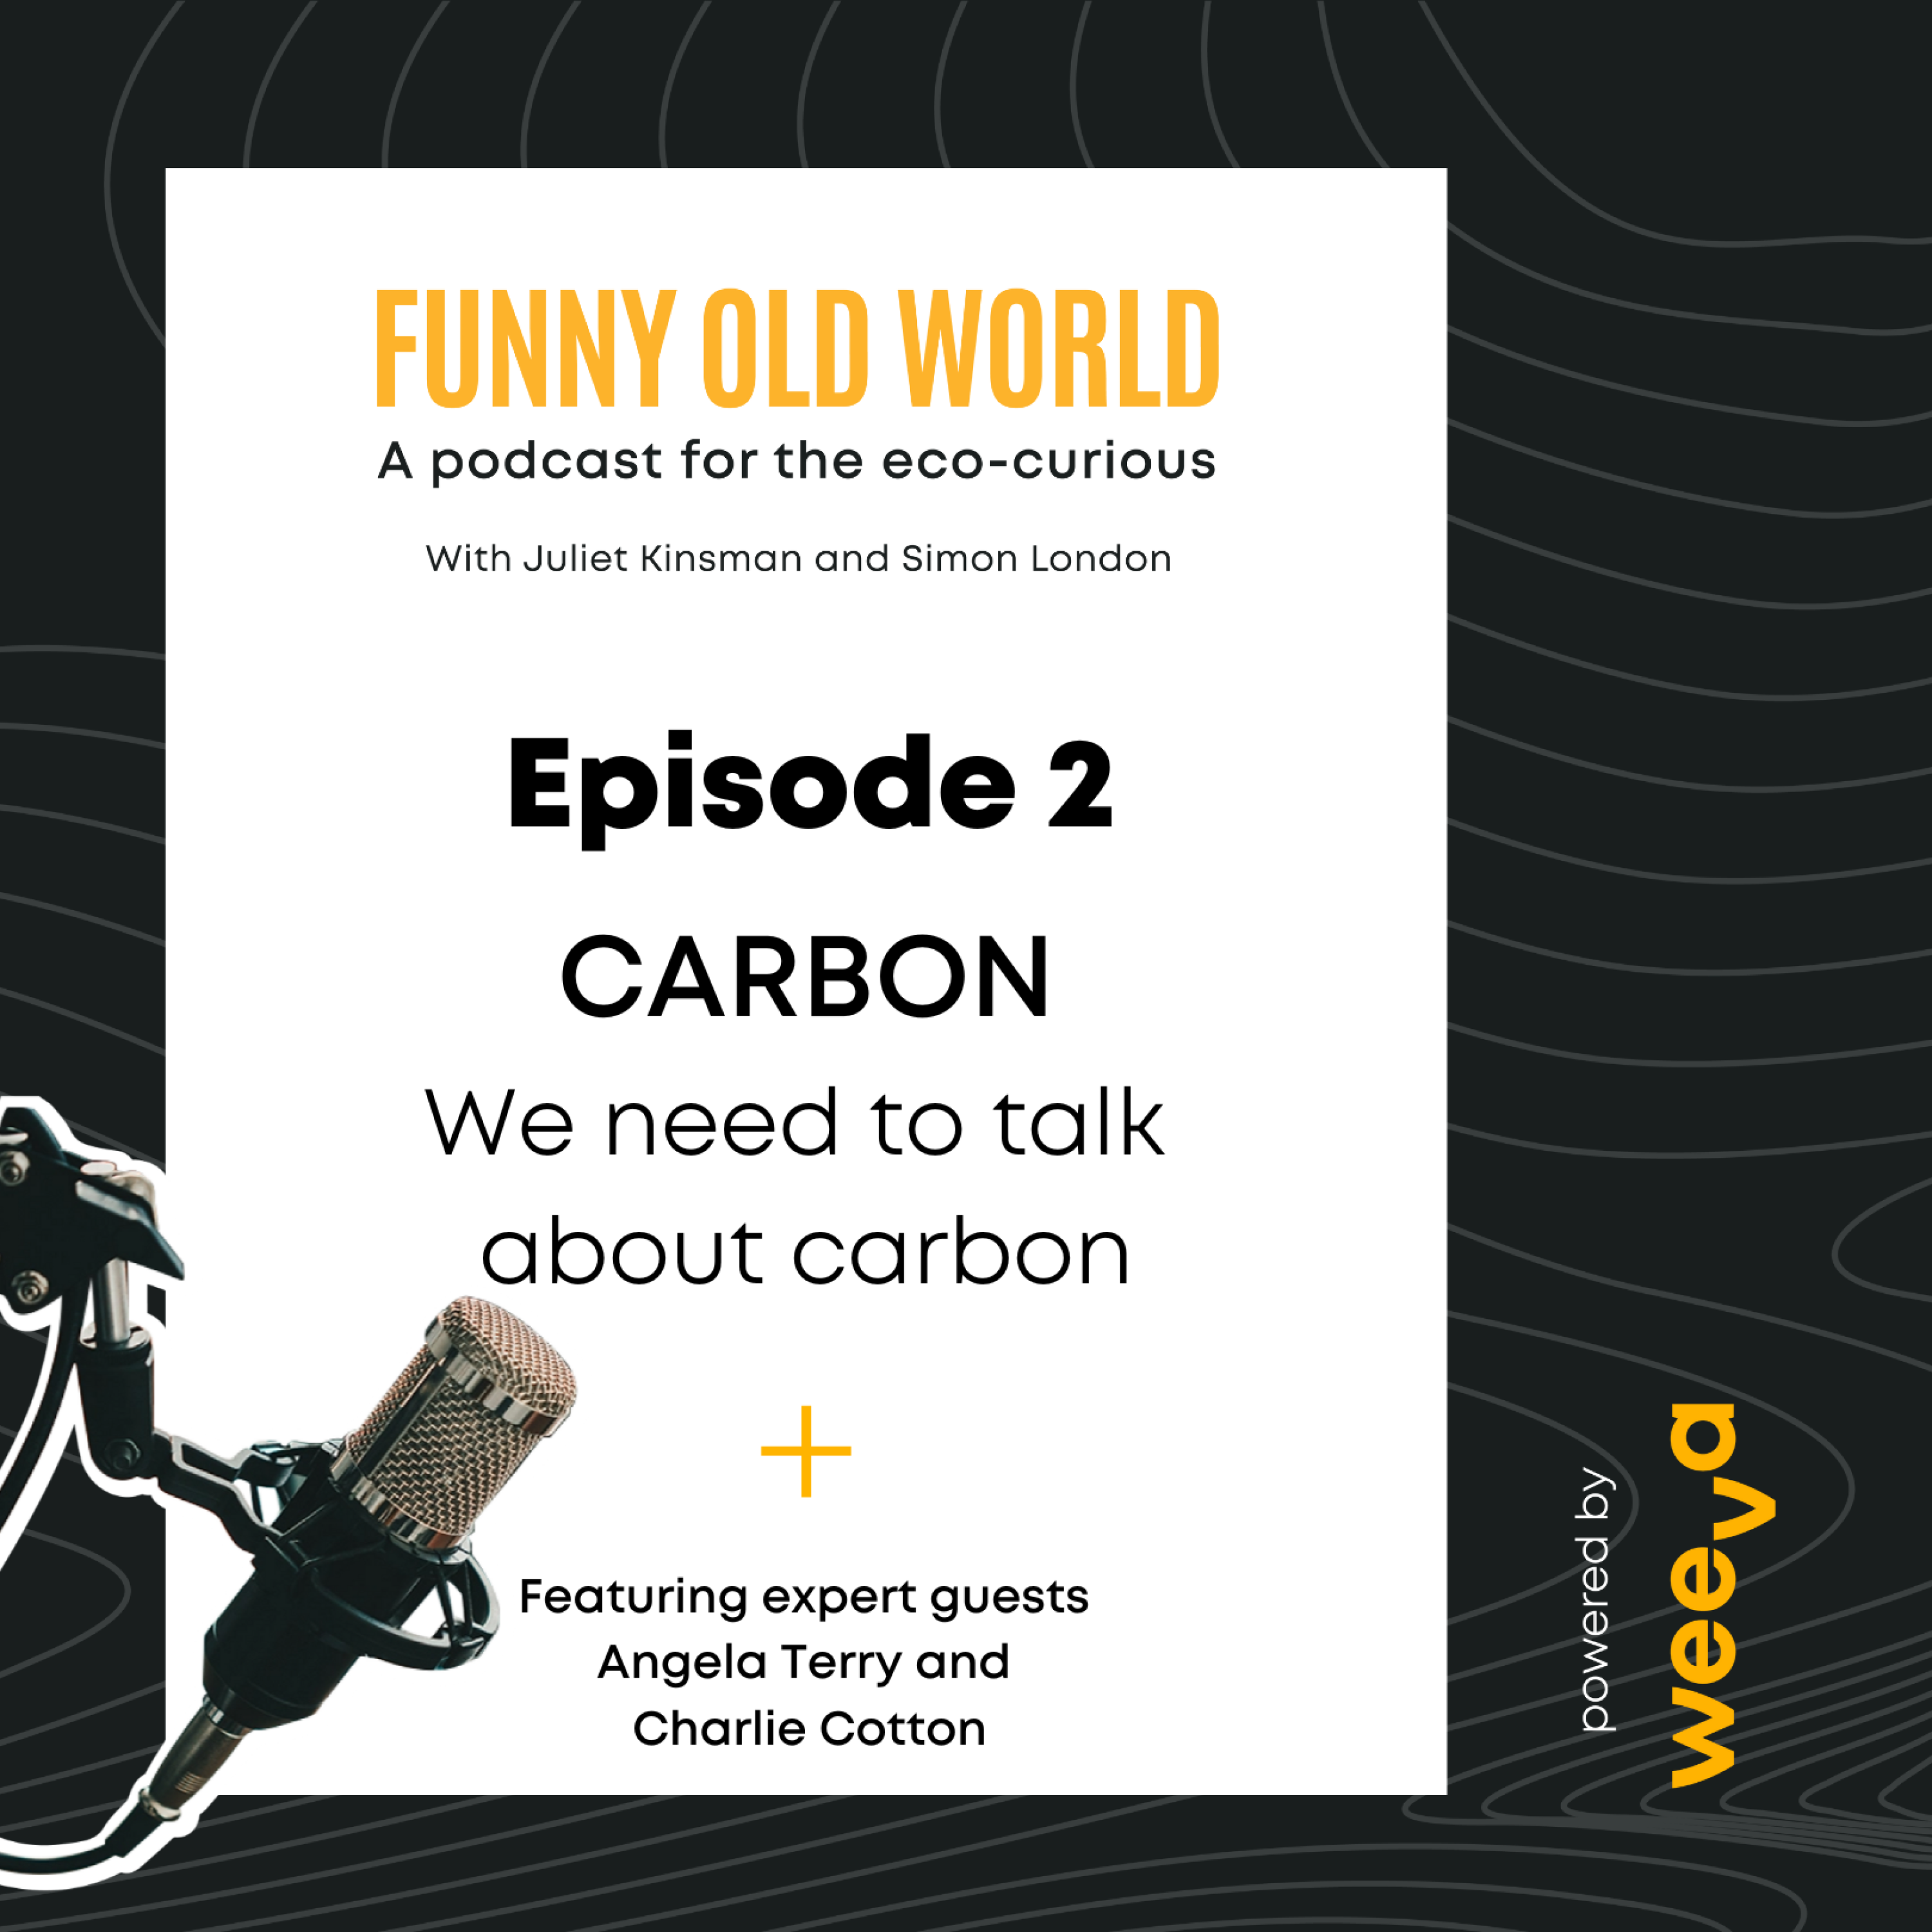 CARBON. We need to talk about carbon